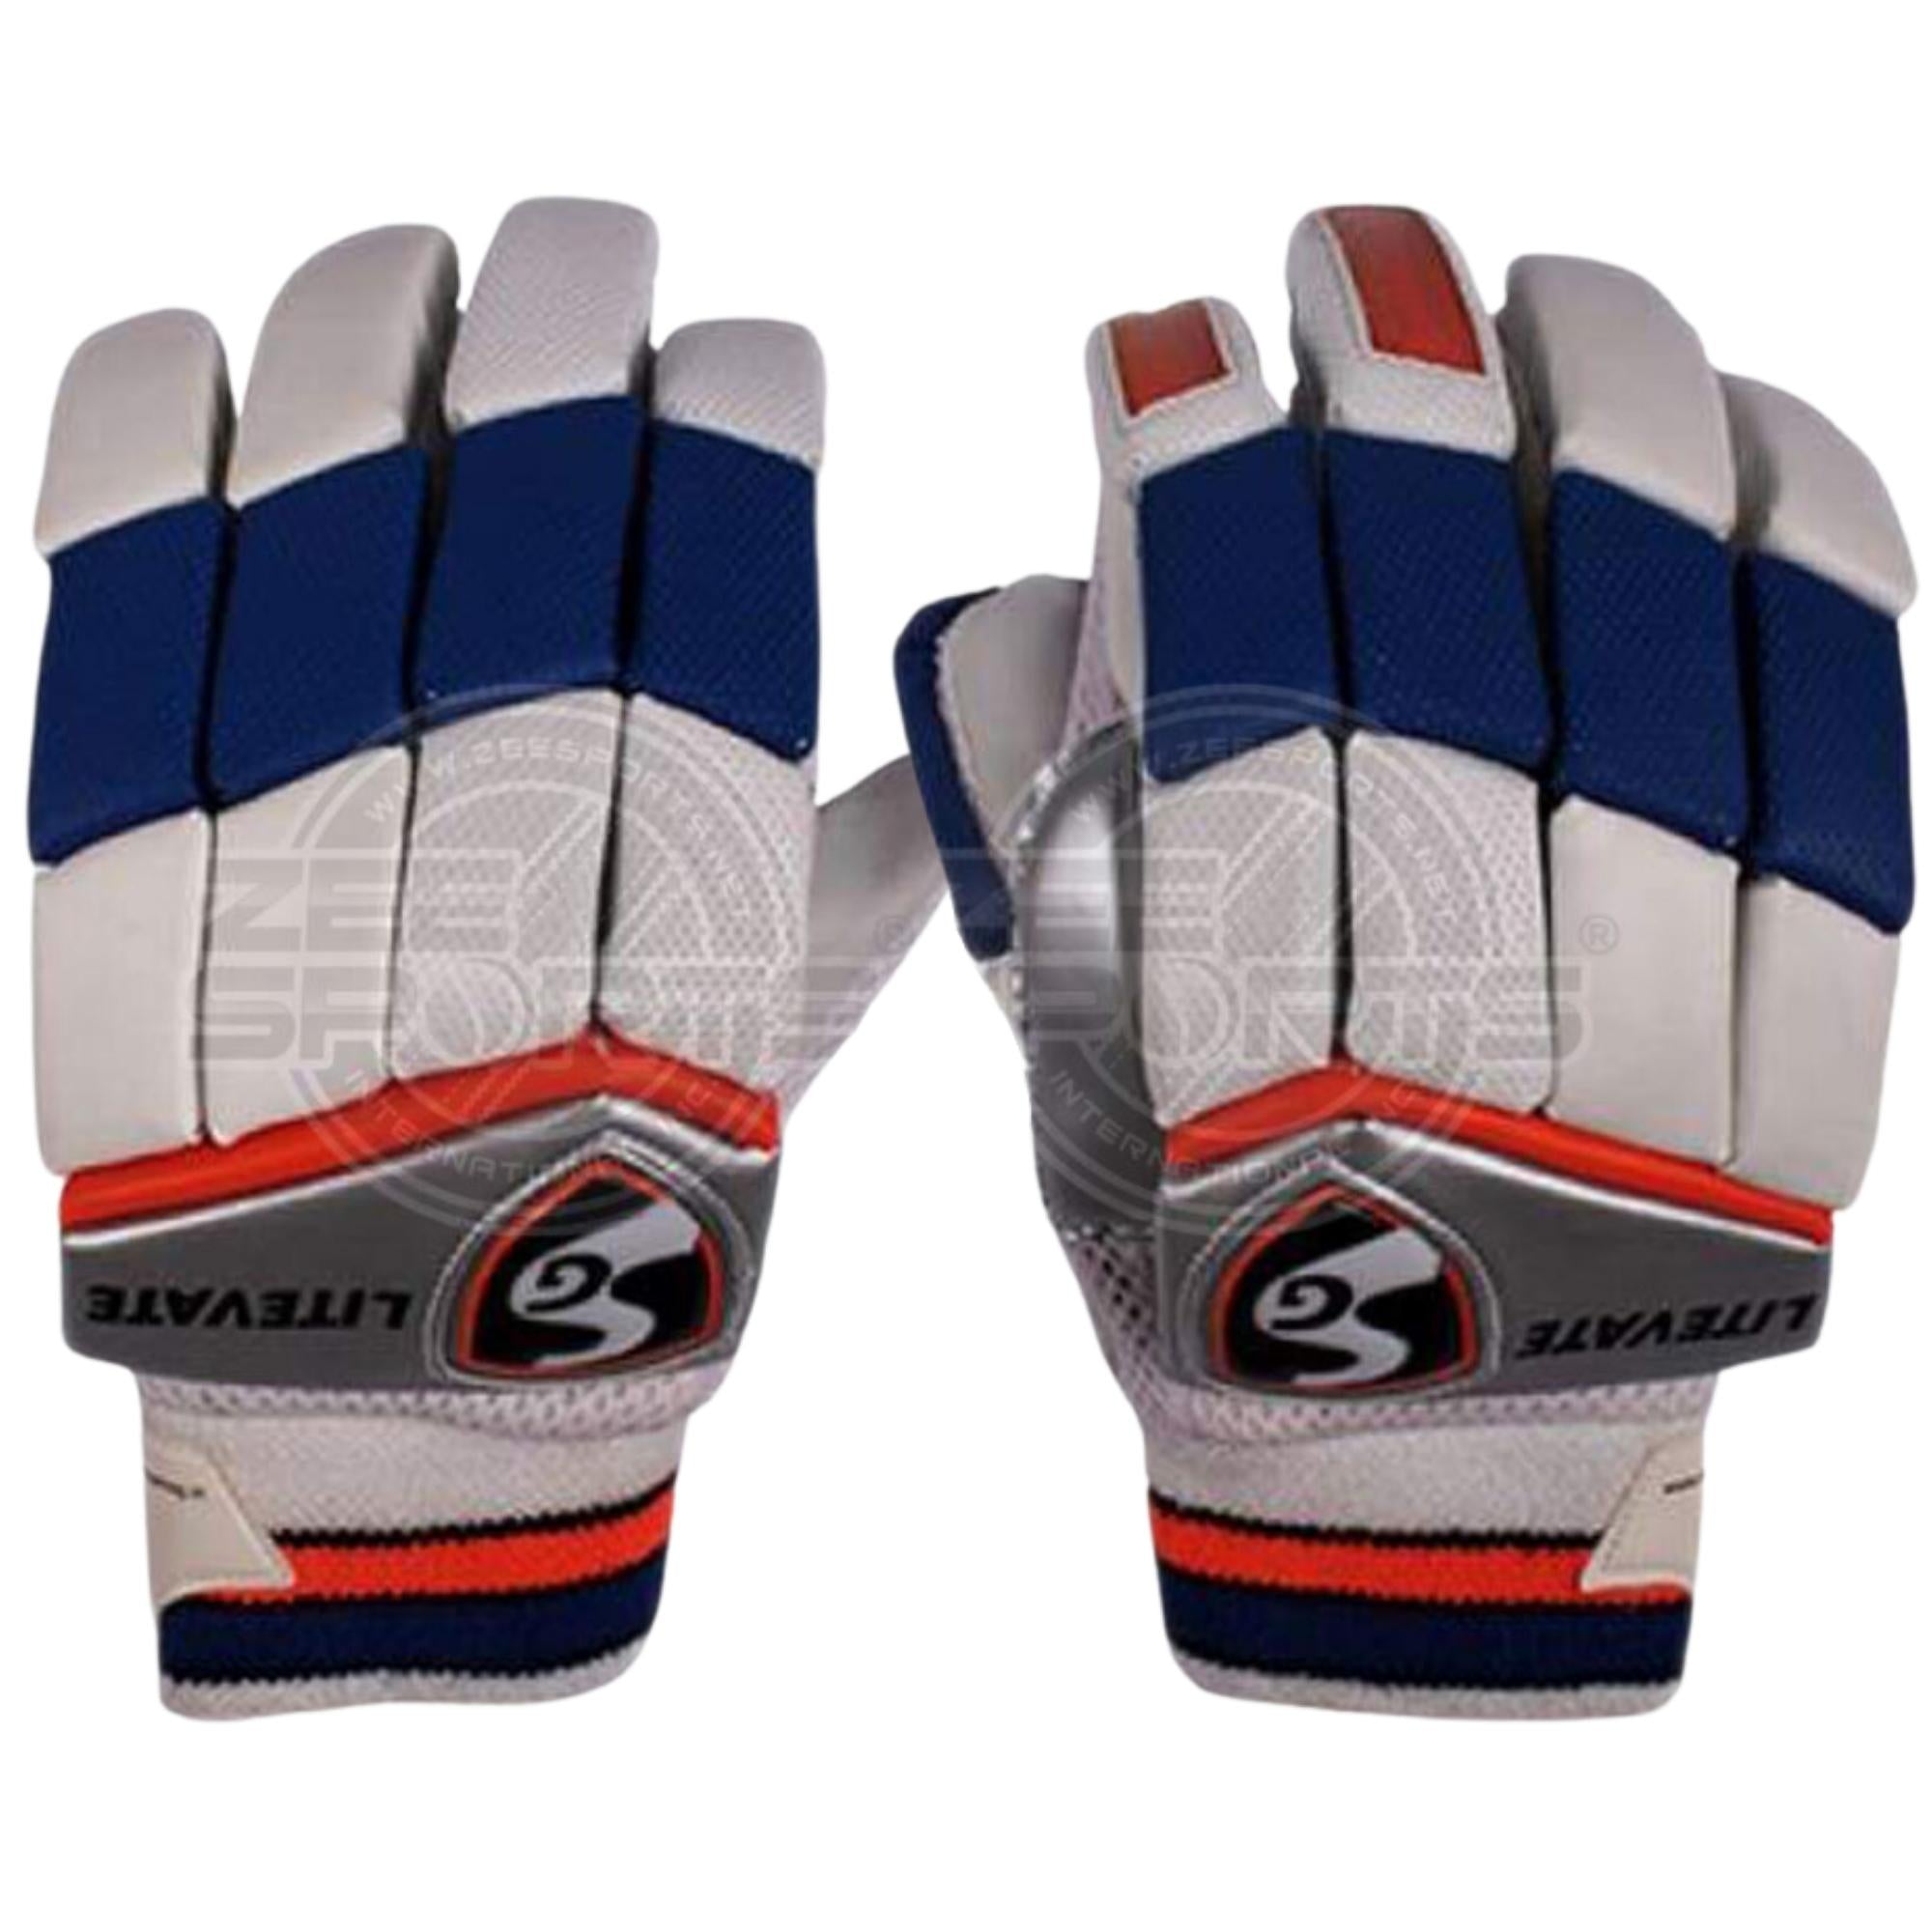 SG Litevate Cricket Batting Gloves Mens Size Right And Left Handed(Color May Vary)